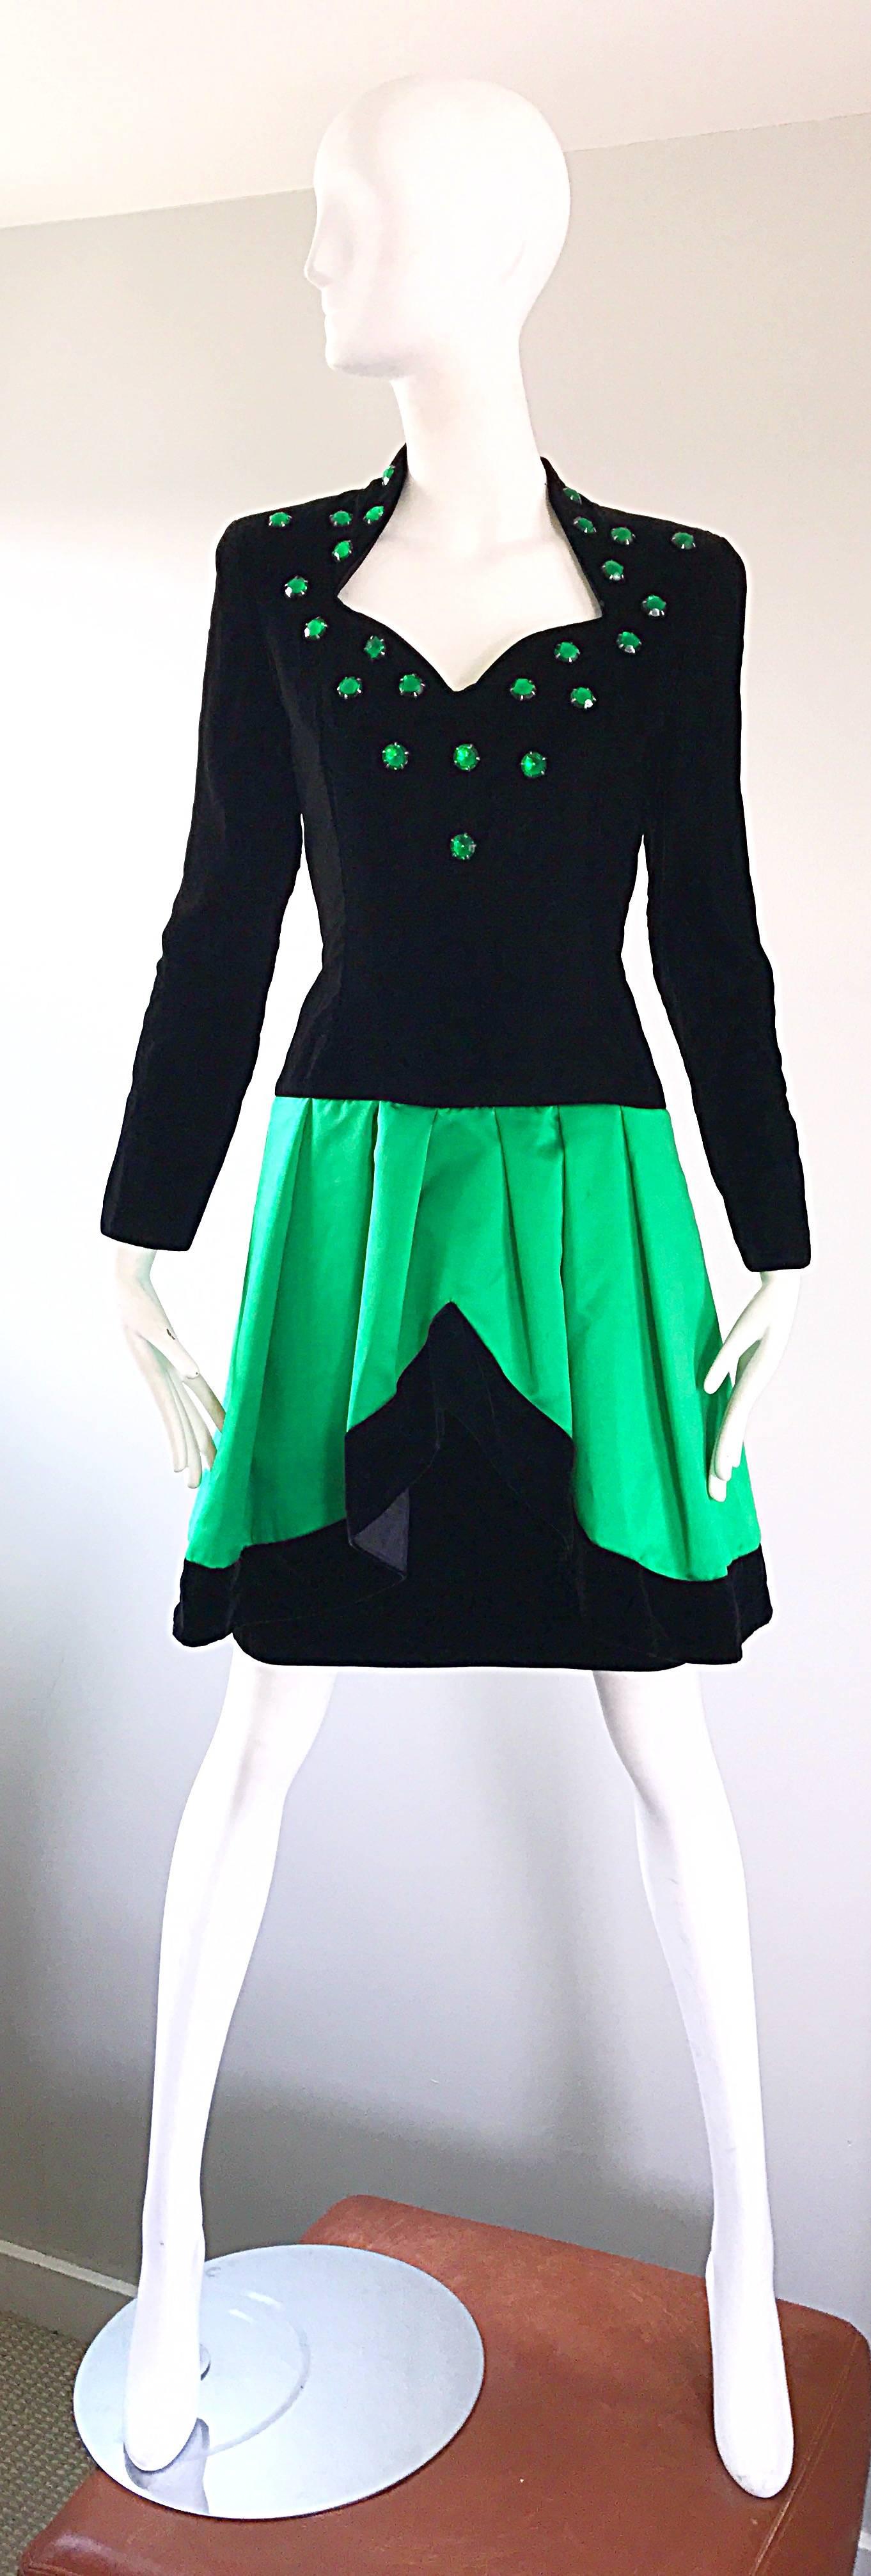 Avant Garde 90s LILLIE RUBIN emerald / Kelly green and black fit and flare long sleeve dress! Features a fitted black velvet bodice with green rhinestone crystals hand-sewn throughout. Flattering sweetheart neckline. The hem on the silk satin full